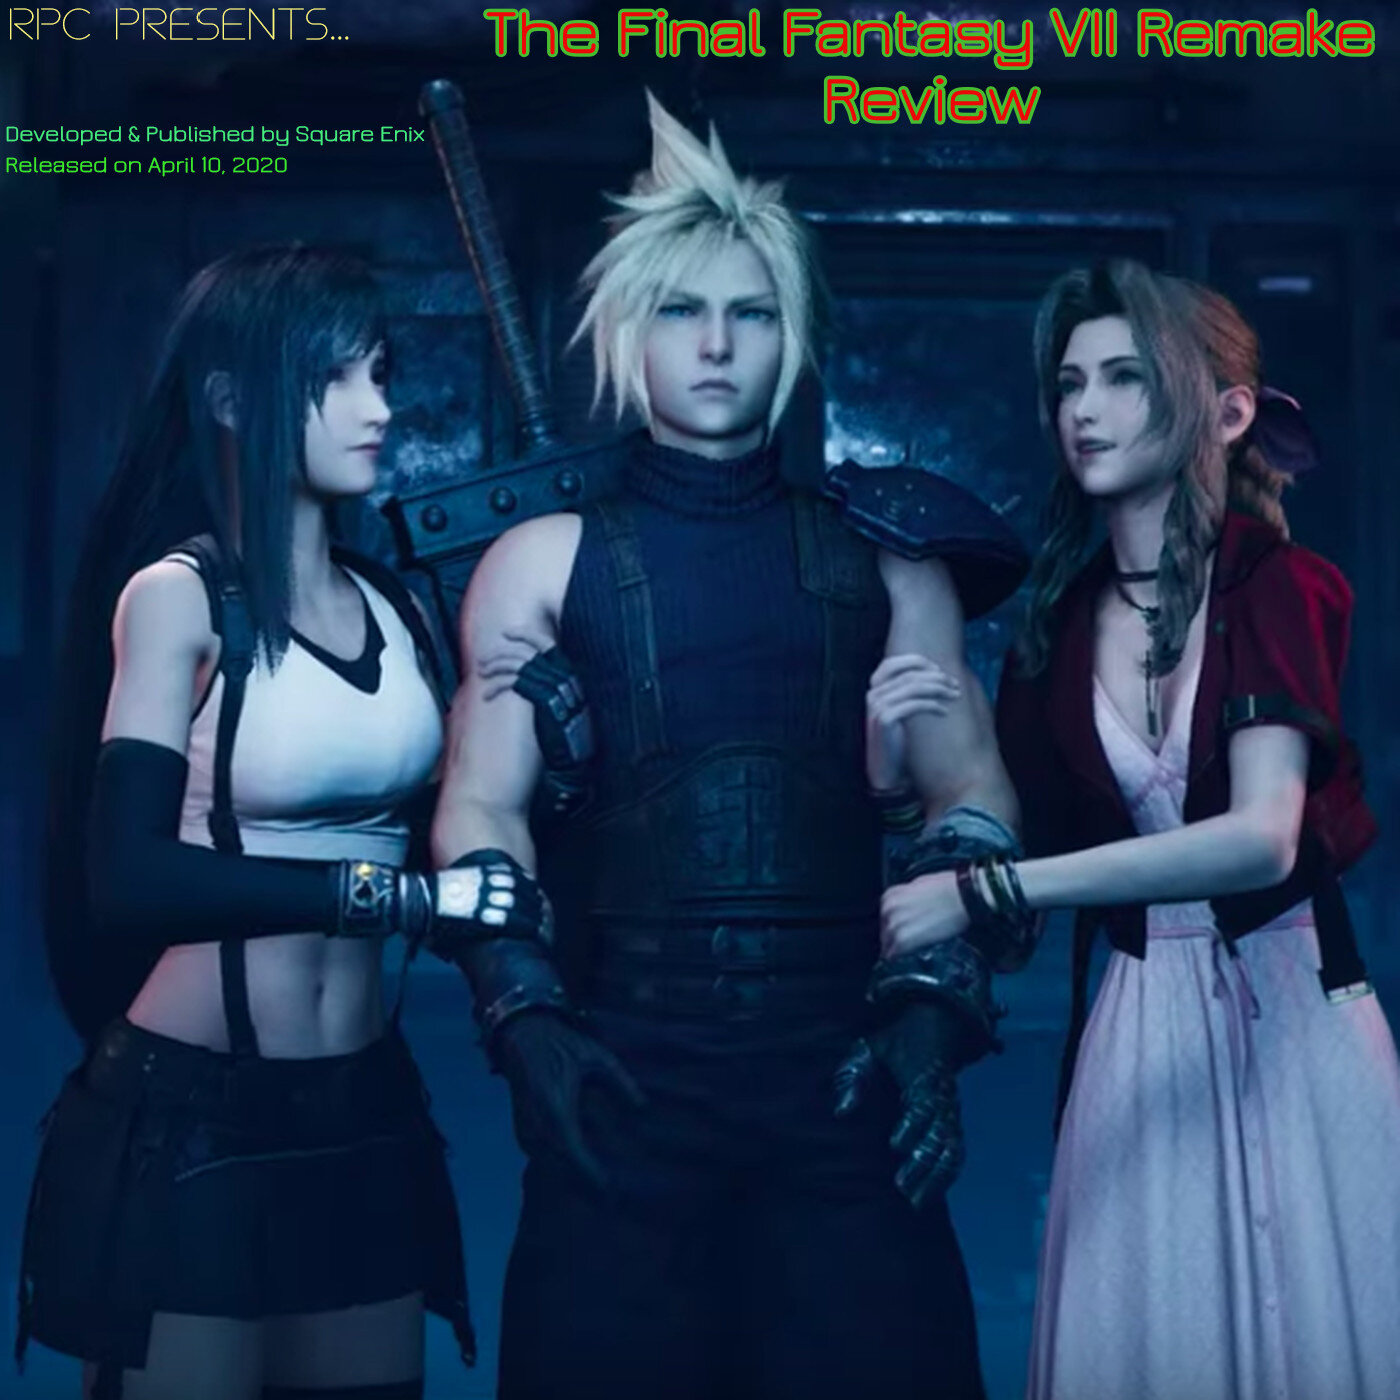 Two Key Questions About 'Final Fantasy VII Remake' Ahead of Square